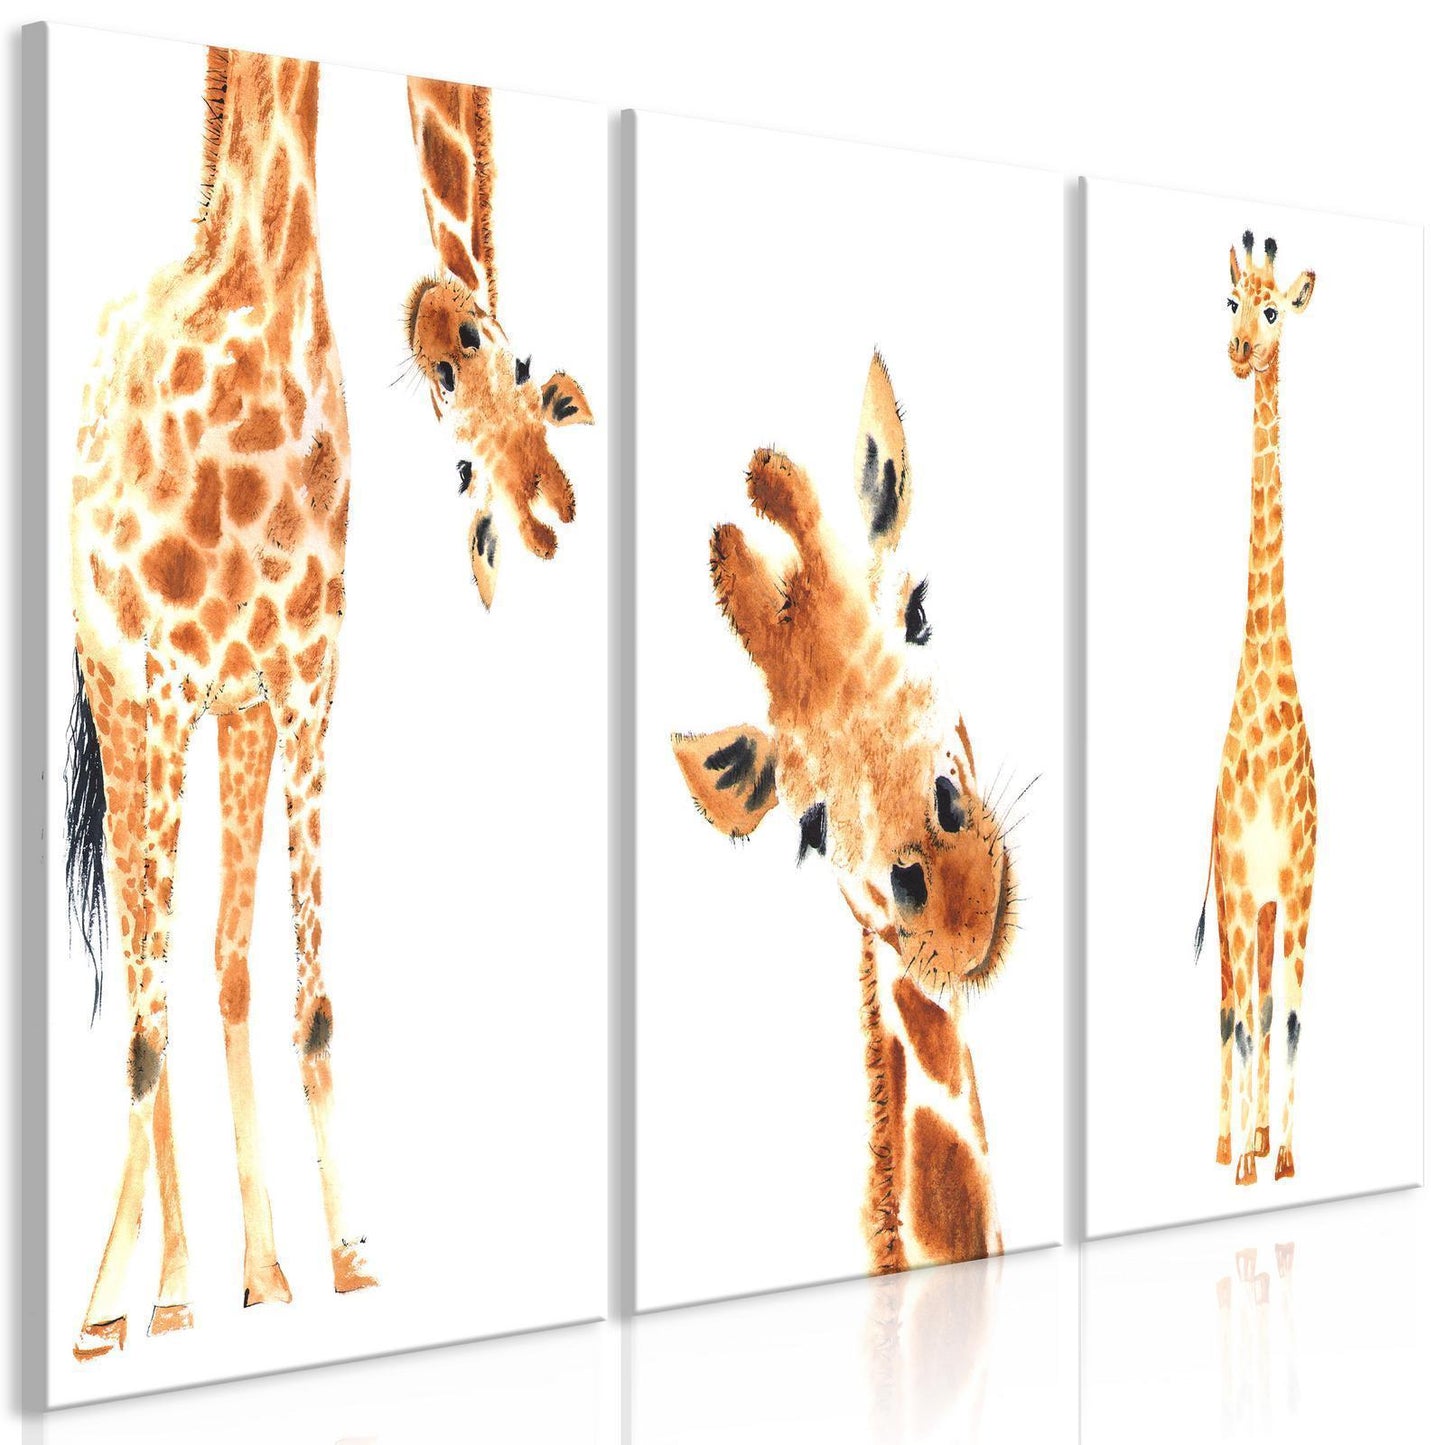 Painting - Funny Giraffes (3 Parts)